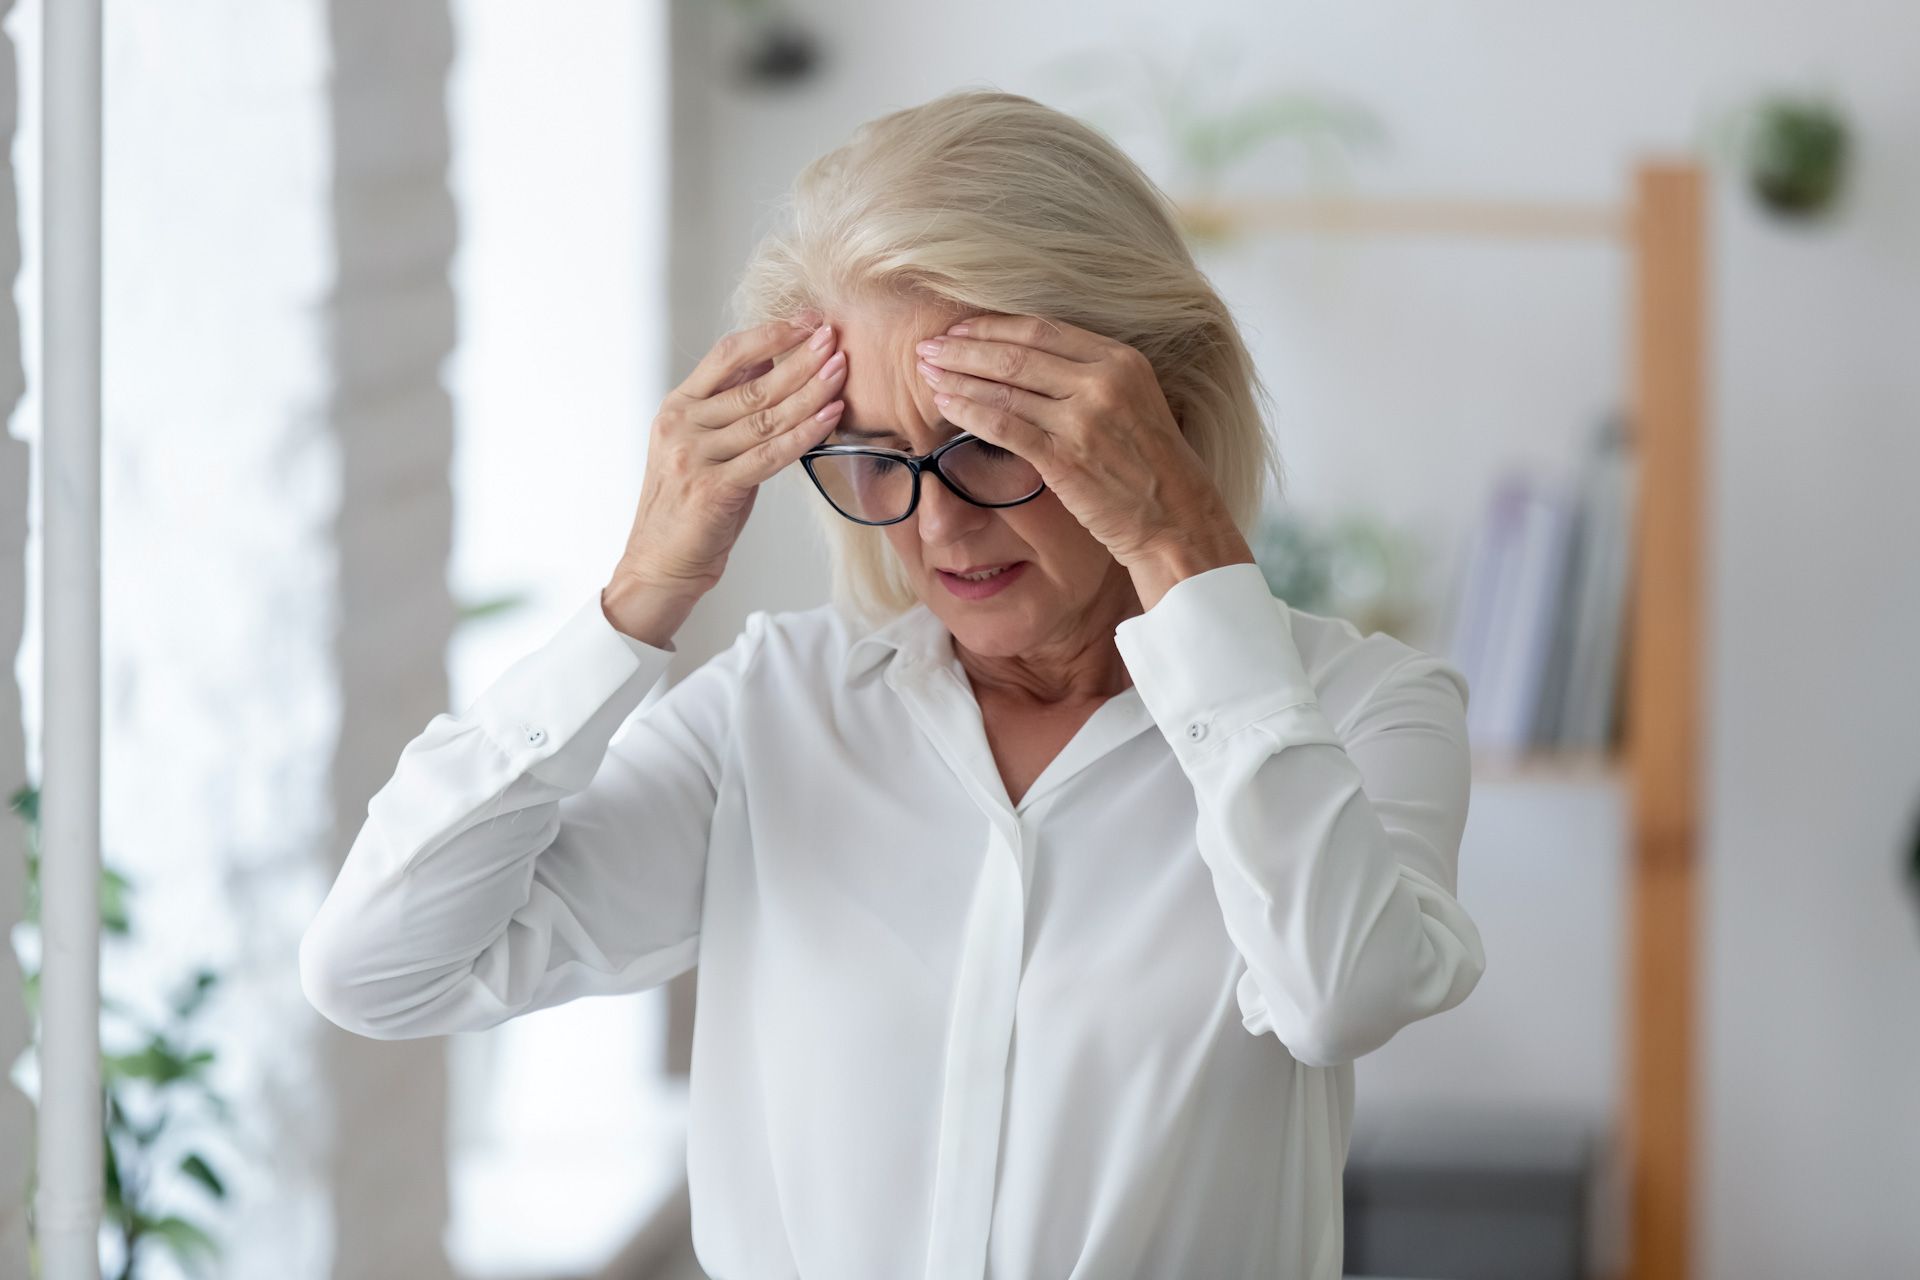 A woman with glasses is holding her head in pain